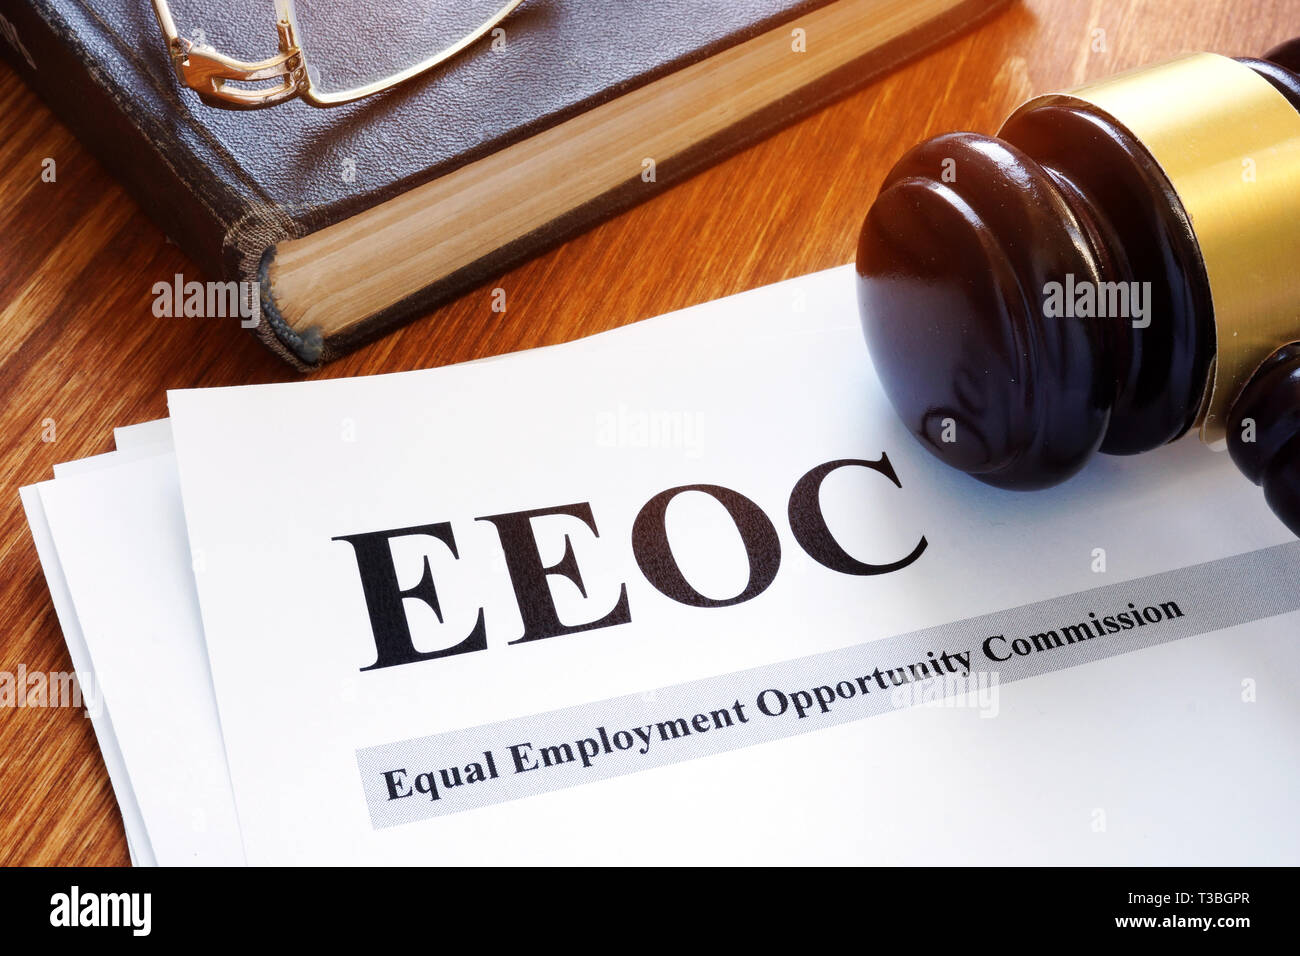 Equal Employment Opportunity Commission EEOC Dokument und Pen in einer  Tabelle Stockfotografie - Alamy